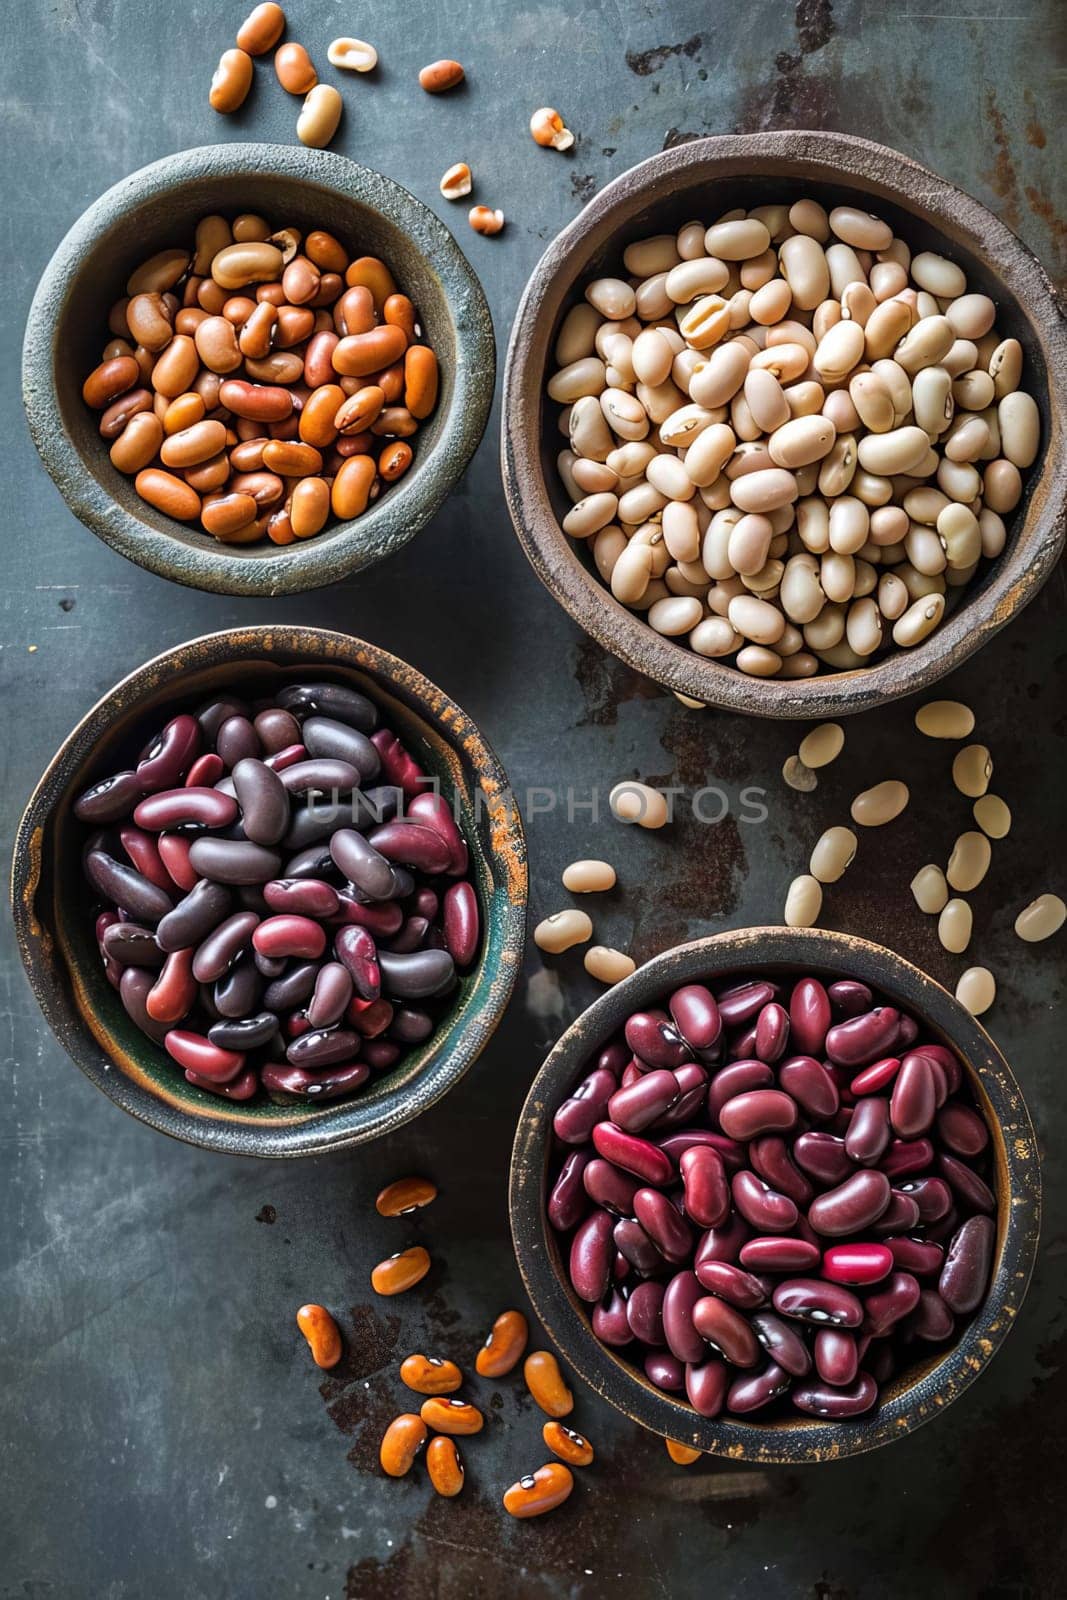 different varieties of beans and legumes. Selective focus. by mila1784